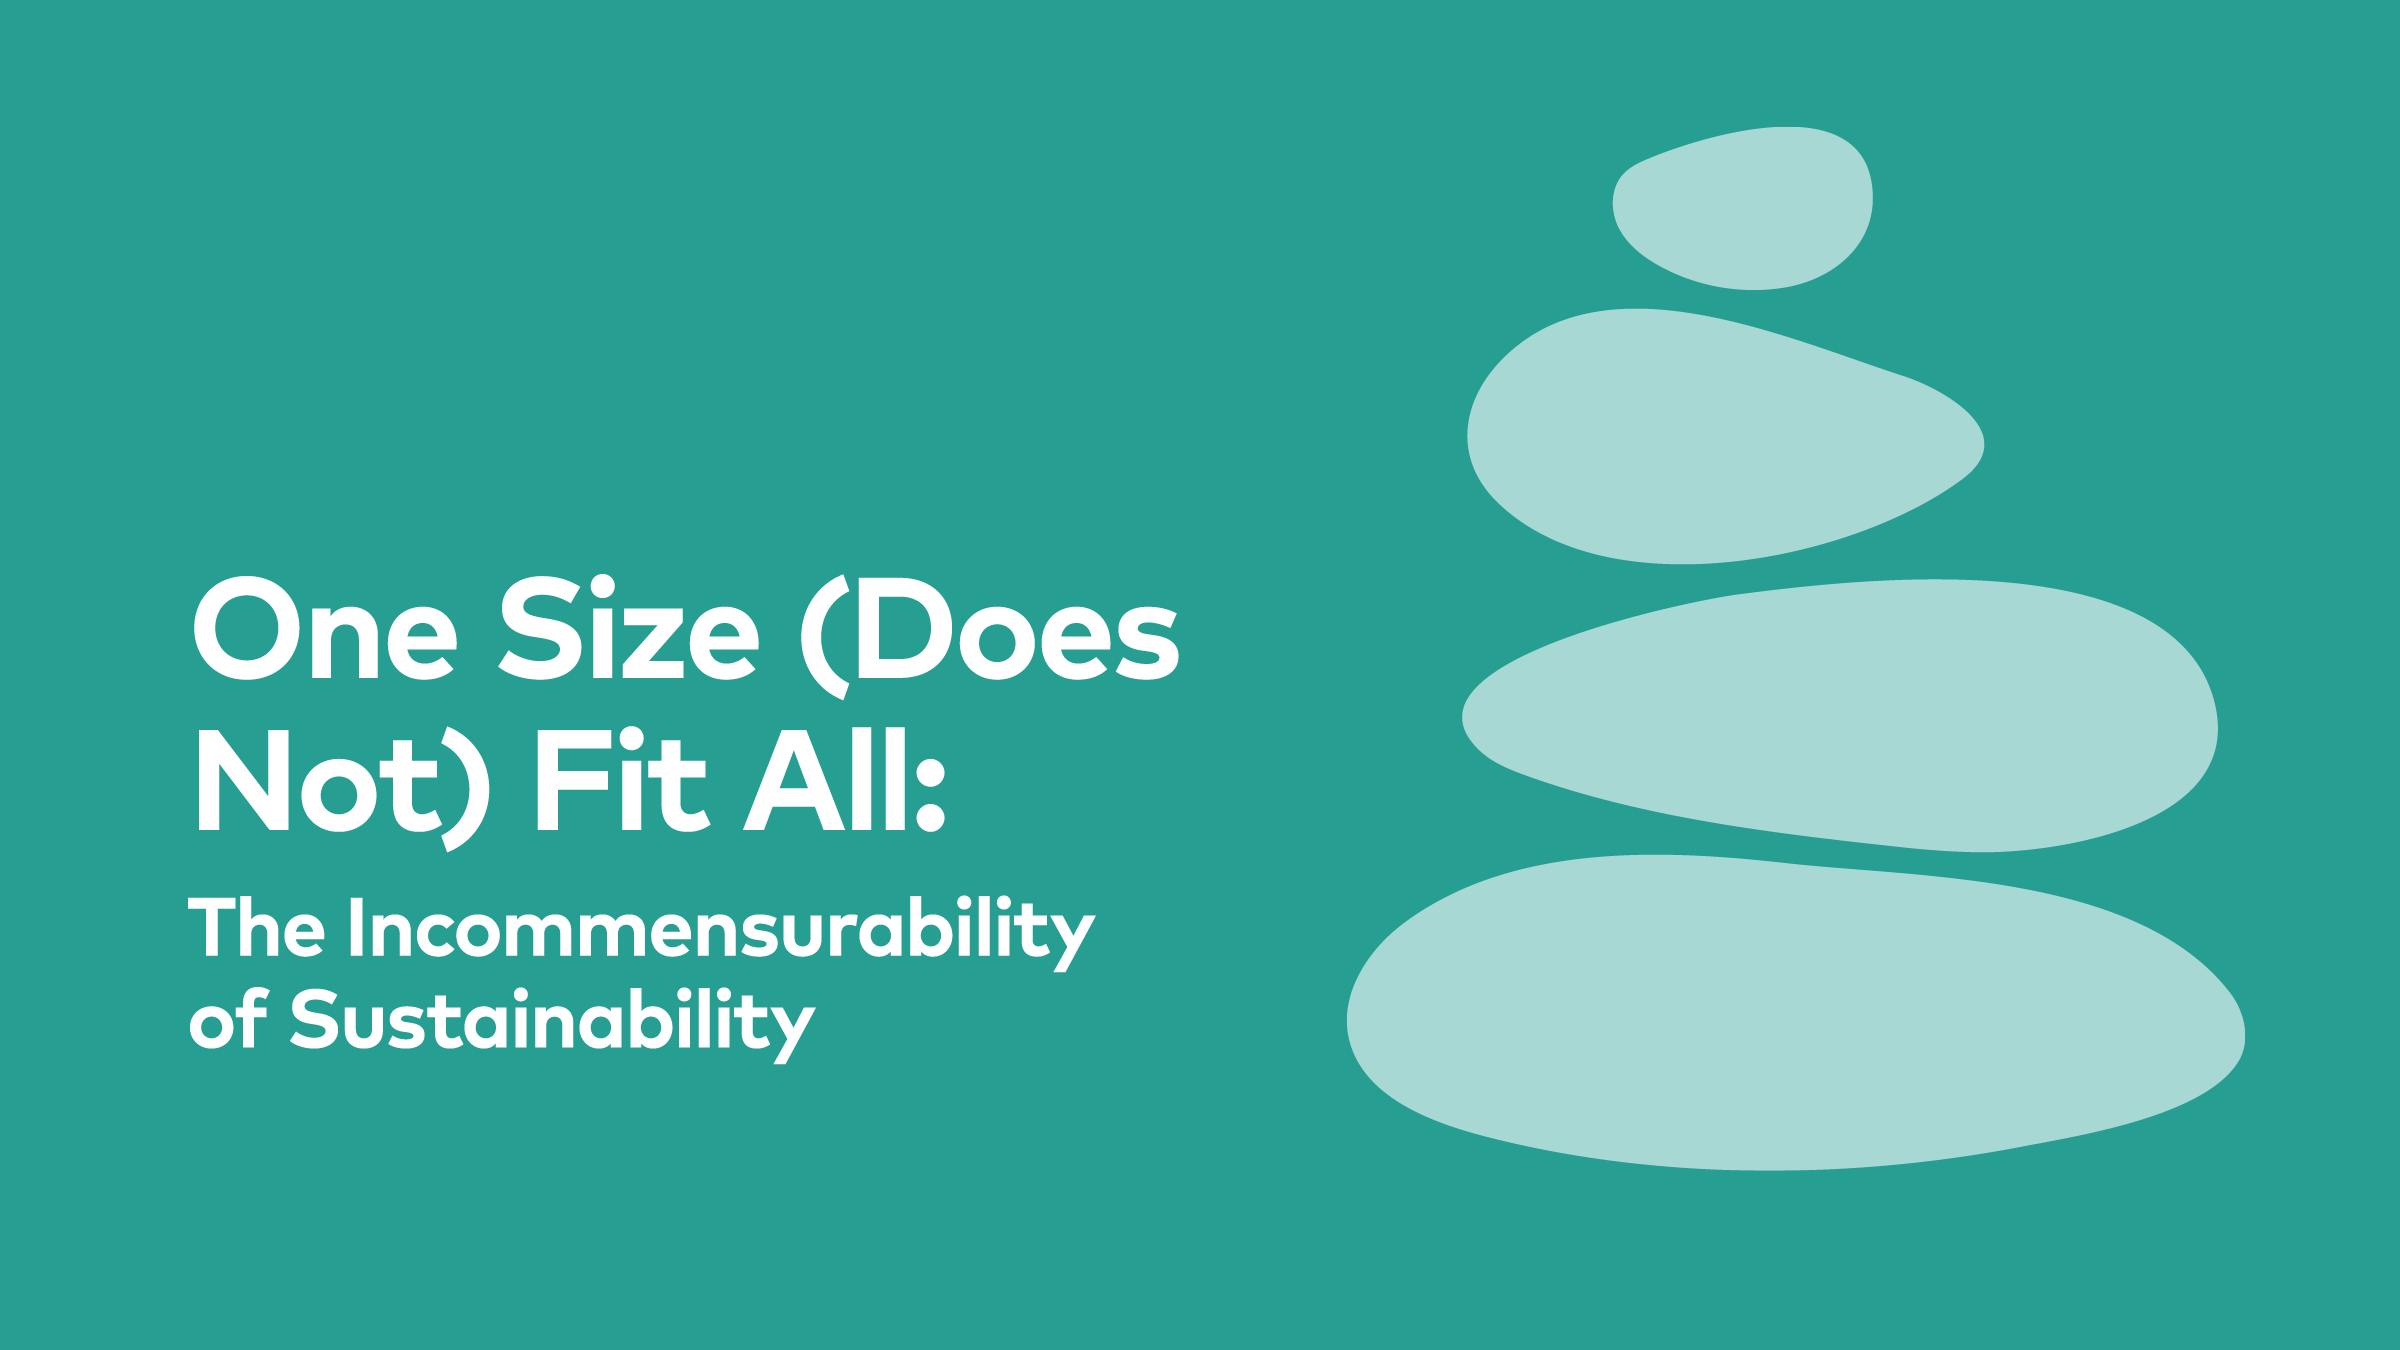 One Size (Does Not) Fit All: The Incommensurability of